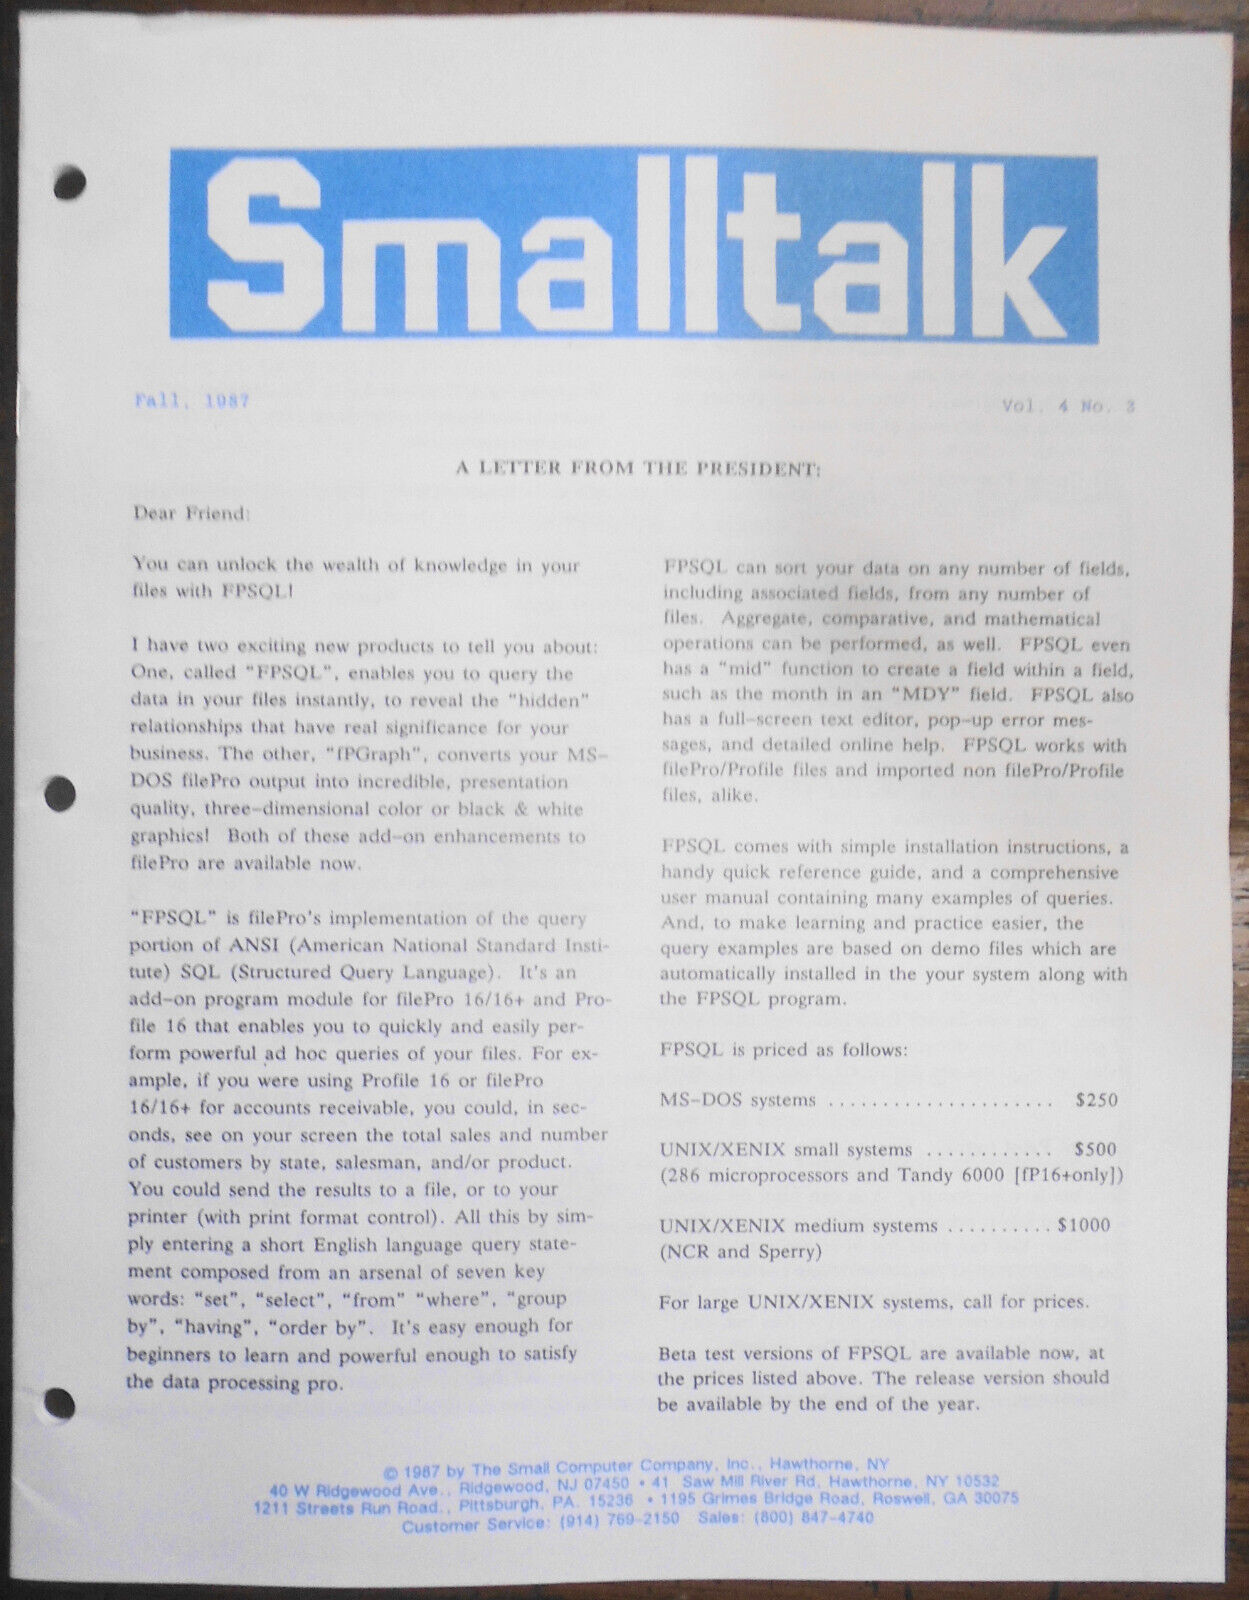 Smalltalk Fall 1987 - for filePro users & developers. Radio Shack, other systems